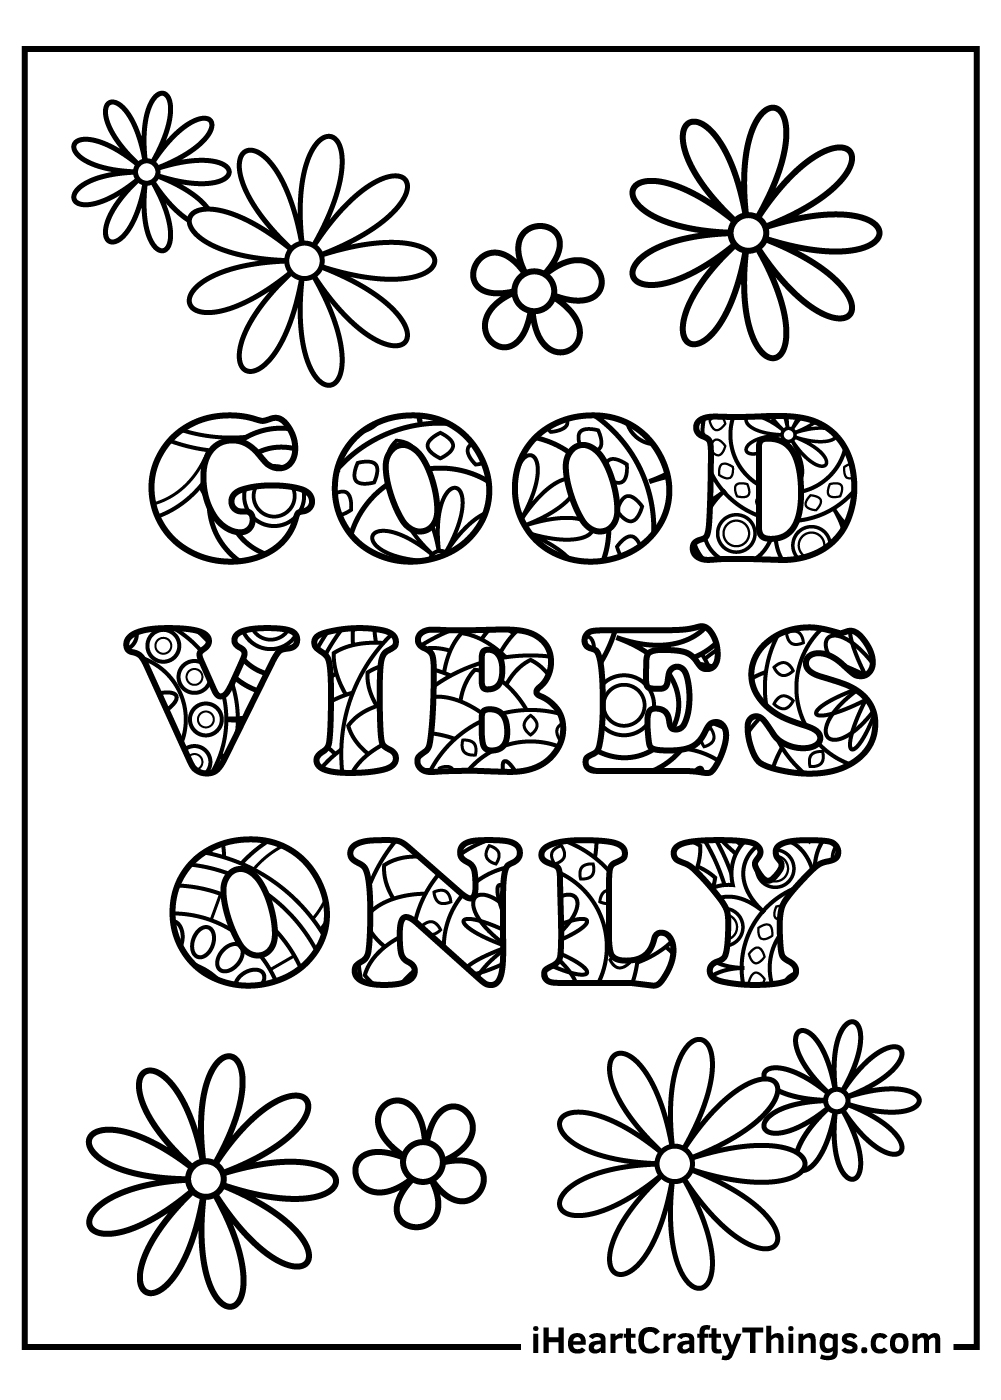 Stress Relief Coloring Pages Updated 2021 